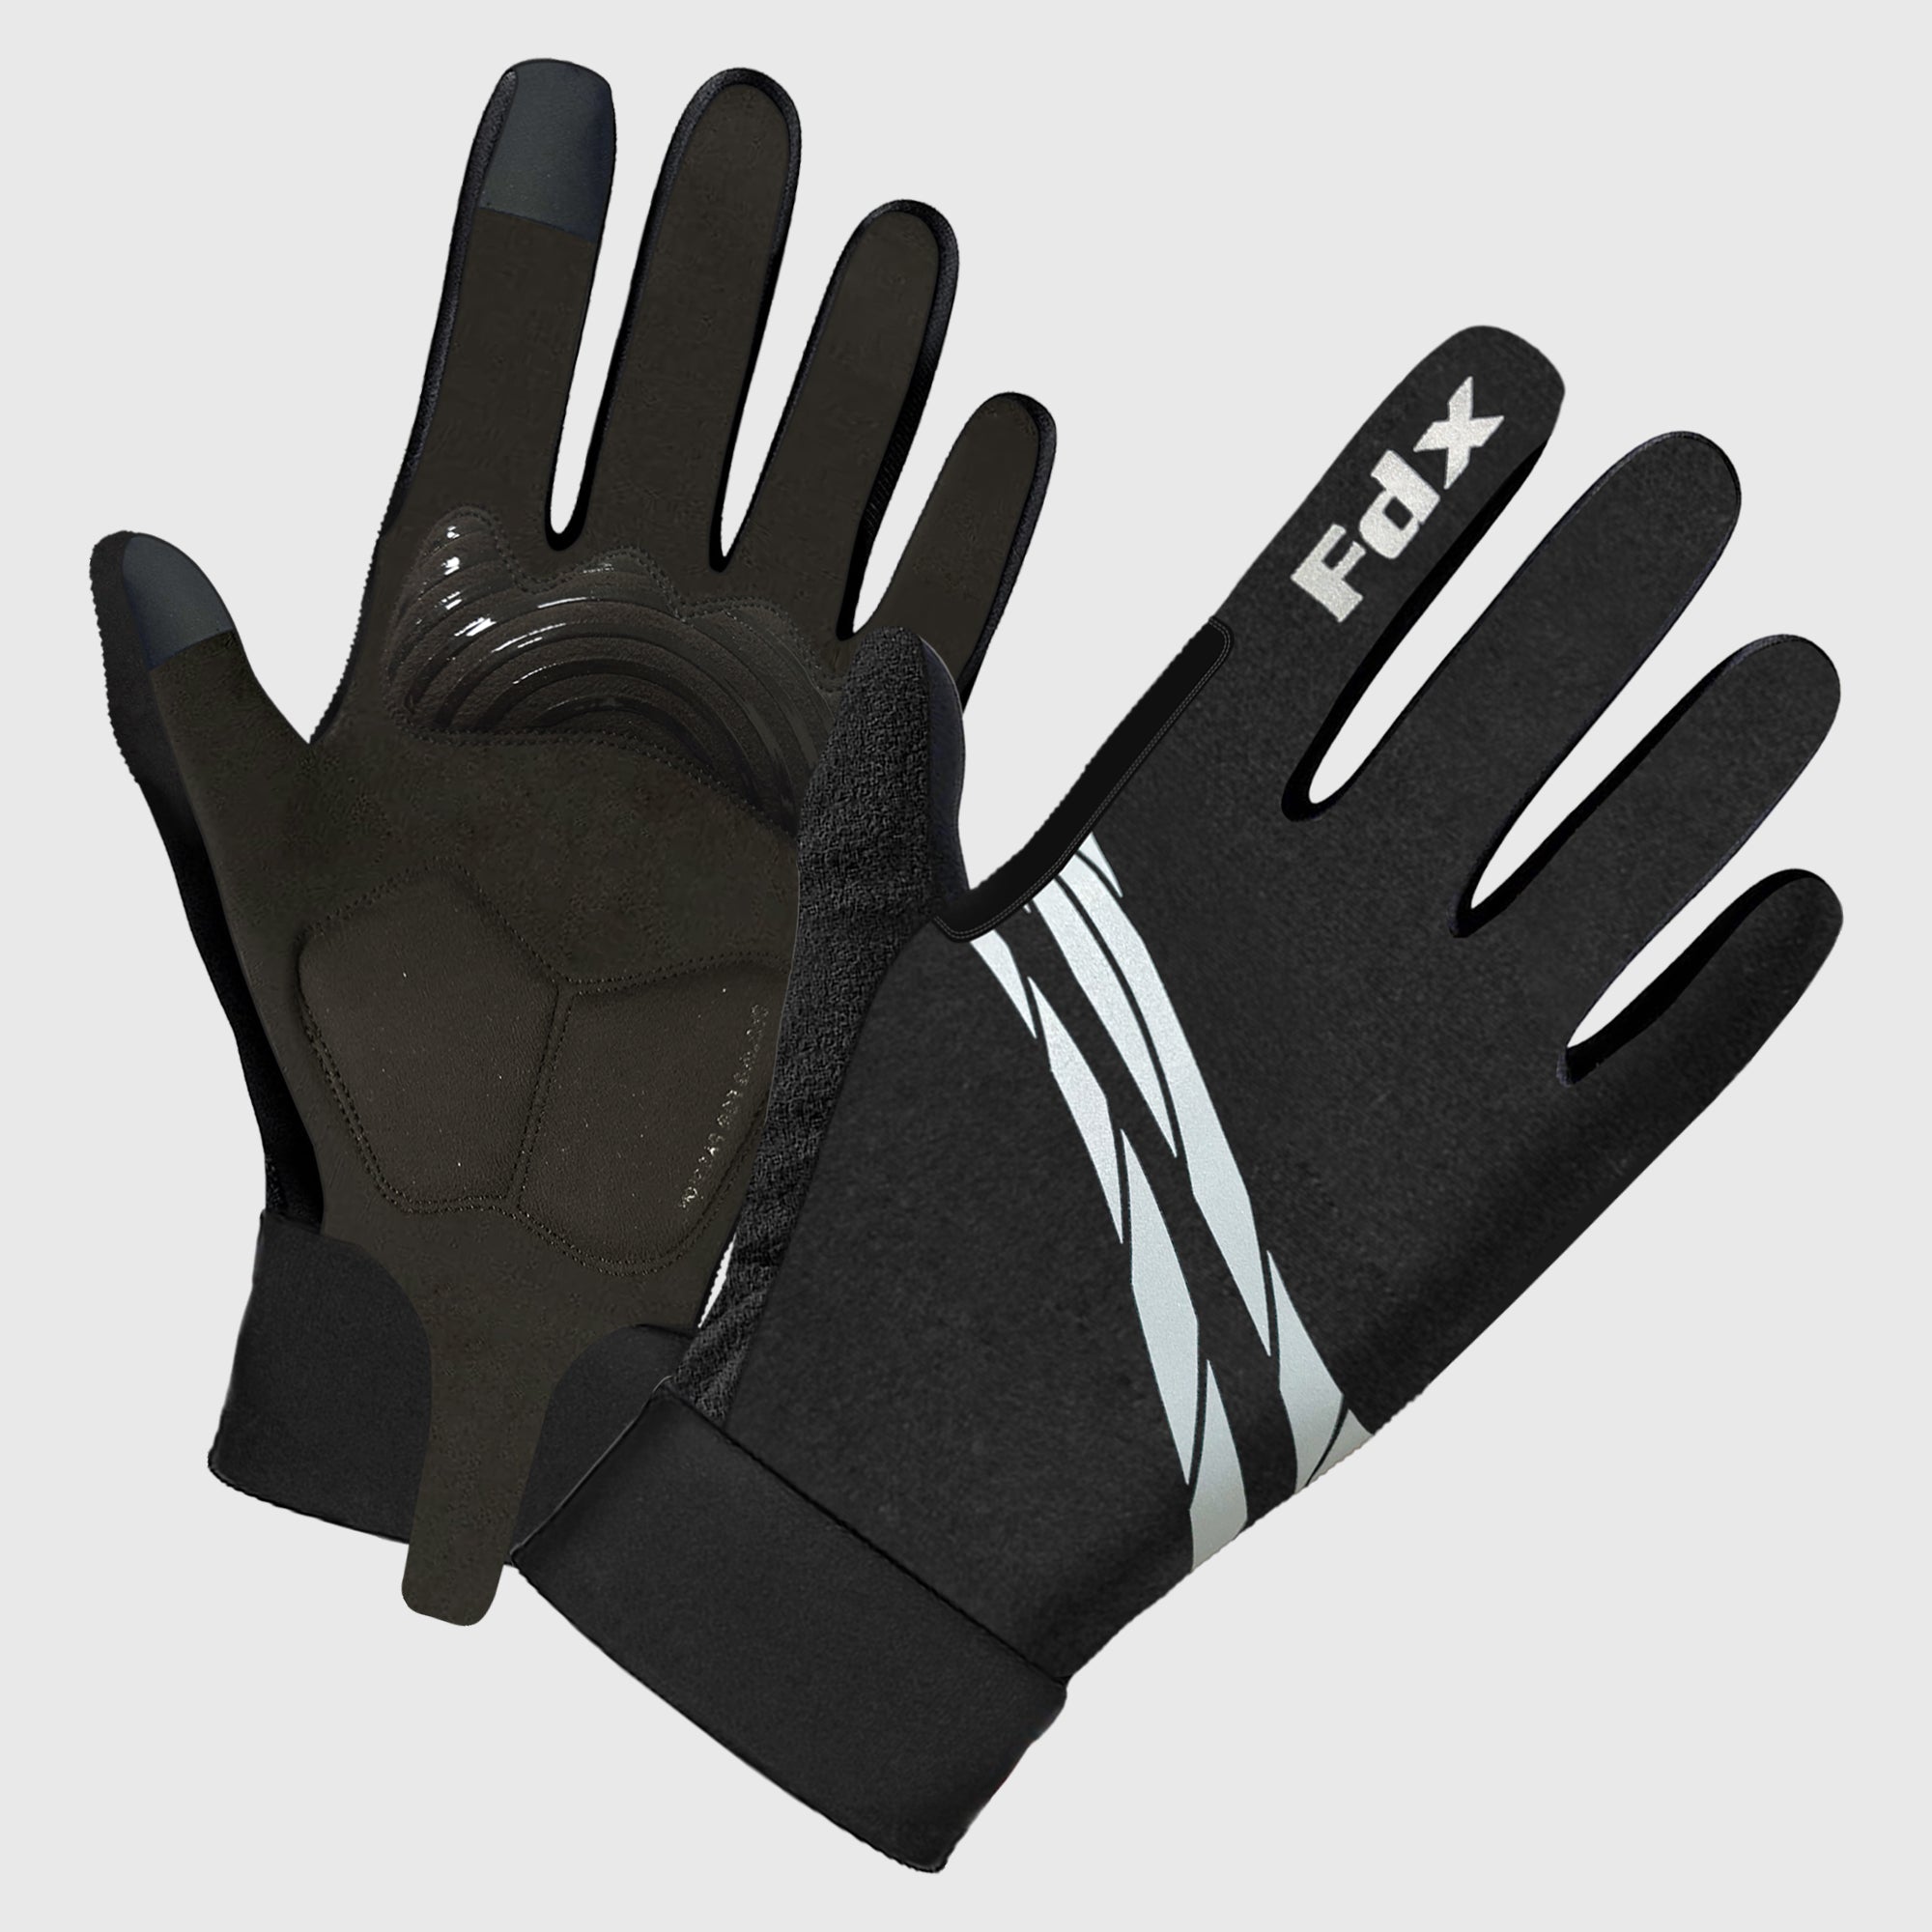 FDX Full Finger Cyclone Winter Cycling Gloves Silicon Gripper Gel padded Long Cuffs Anti Slip Reflective Details UK